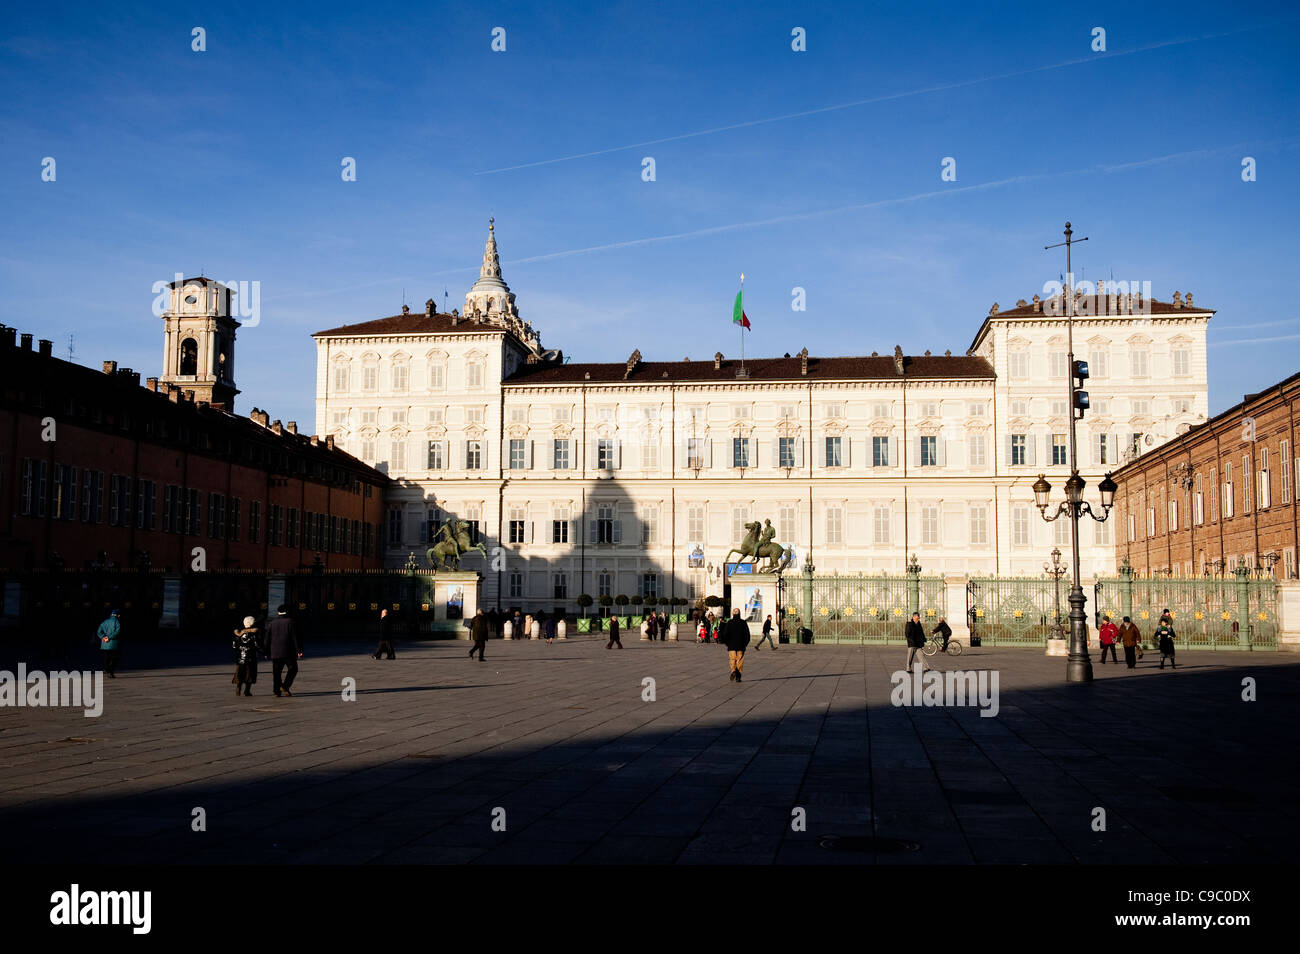 Palazzo Reale, constructed from 1646 in Piazza Castello in the historic centre of Turin, Italy Stock Photo